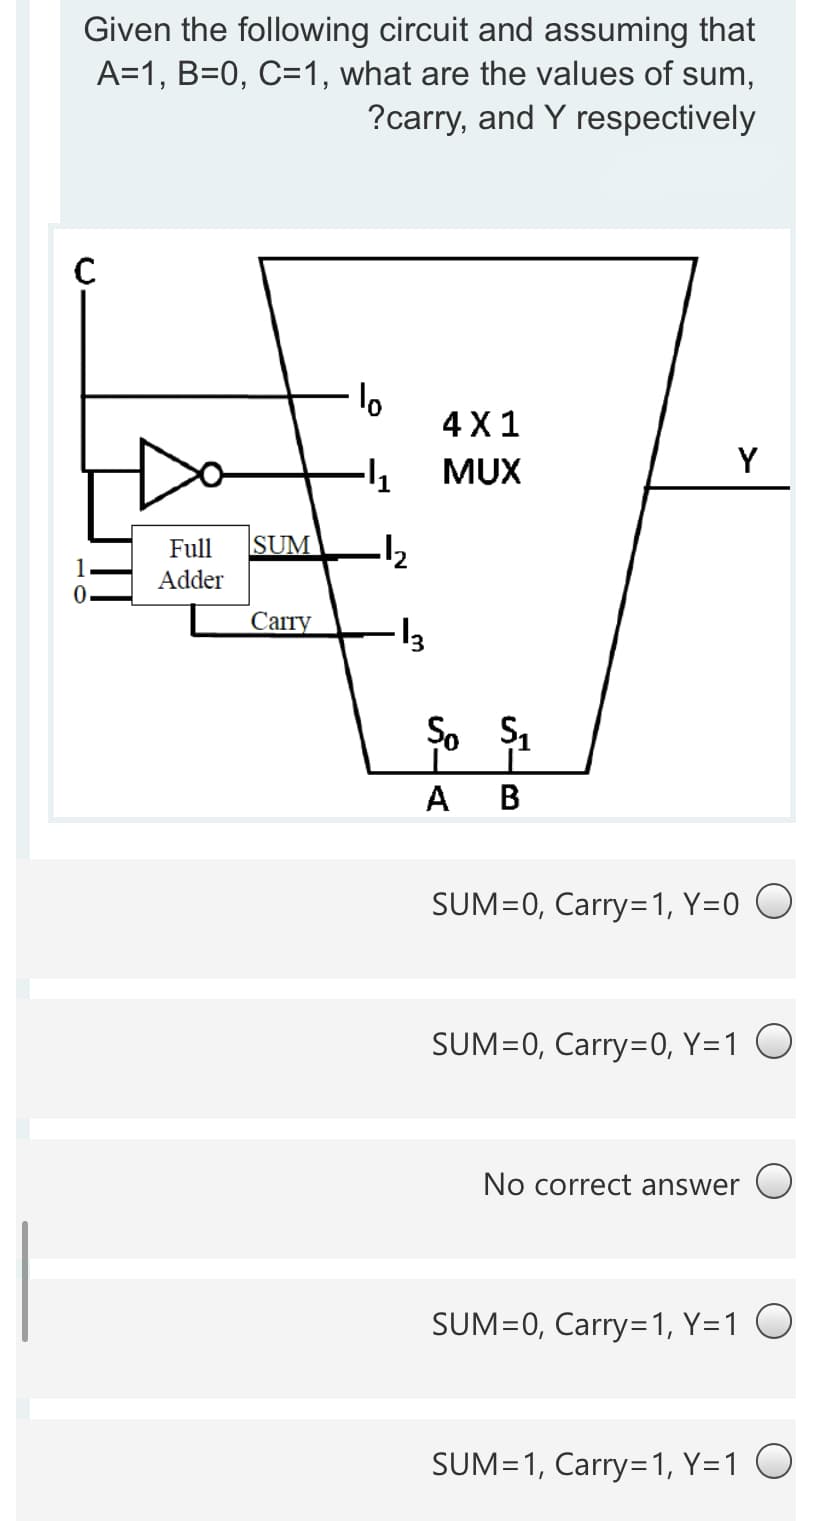 Given the following circuit and assuming that
A=1, B=0, C=1, what are the values of sum,
?carry, and Y respectively
4 X1
MUX
Y
Full
SUM
-12
Adder
Сапу
So S1
А В
SUM=0, Carry=1, Y=0 O
SUM=0, Carry=0, Y=1 O
No correct answer O
SUM=0, Carry=1, Y=1 O
SUM=1, Carry=1, Y=1 O
